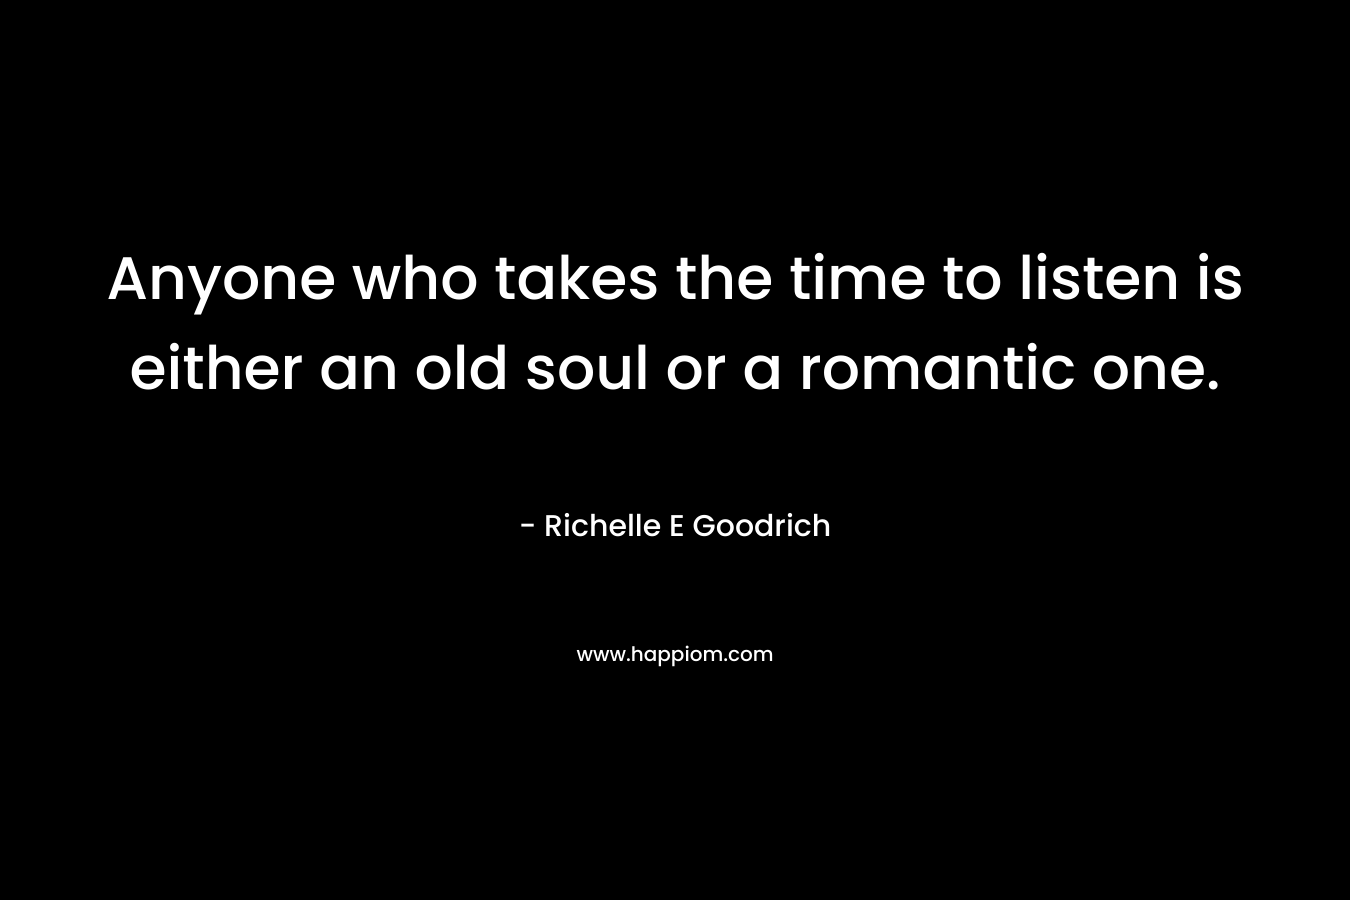 Anyone who takes the time to listen is either an old soul or a romantic one.